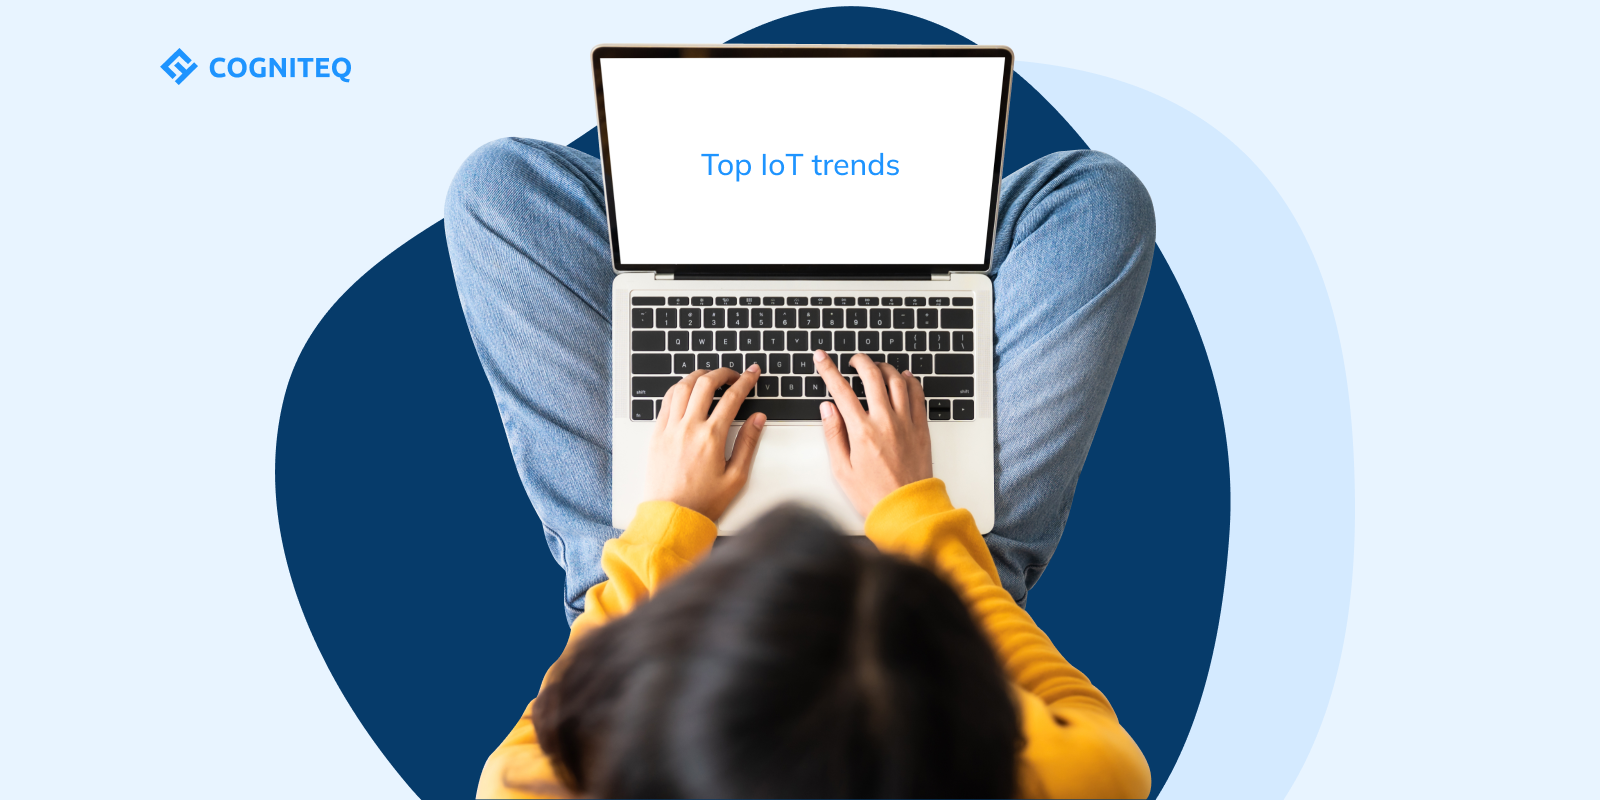 Top 10 IoT trends expected to shape the future